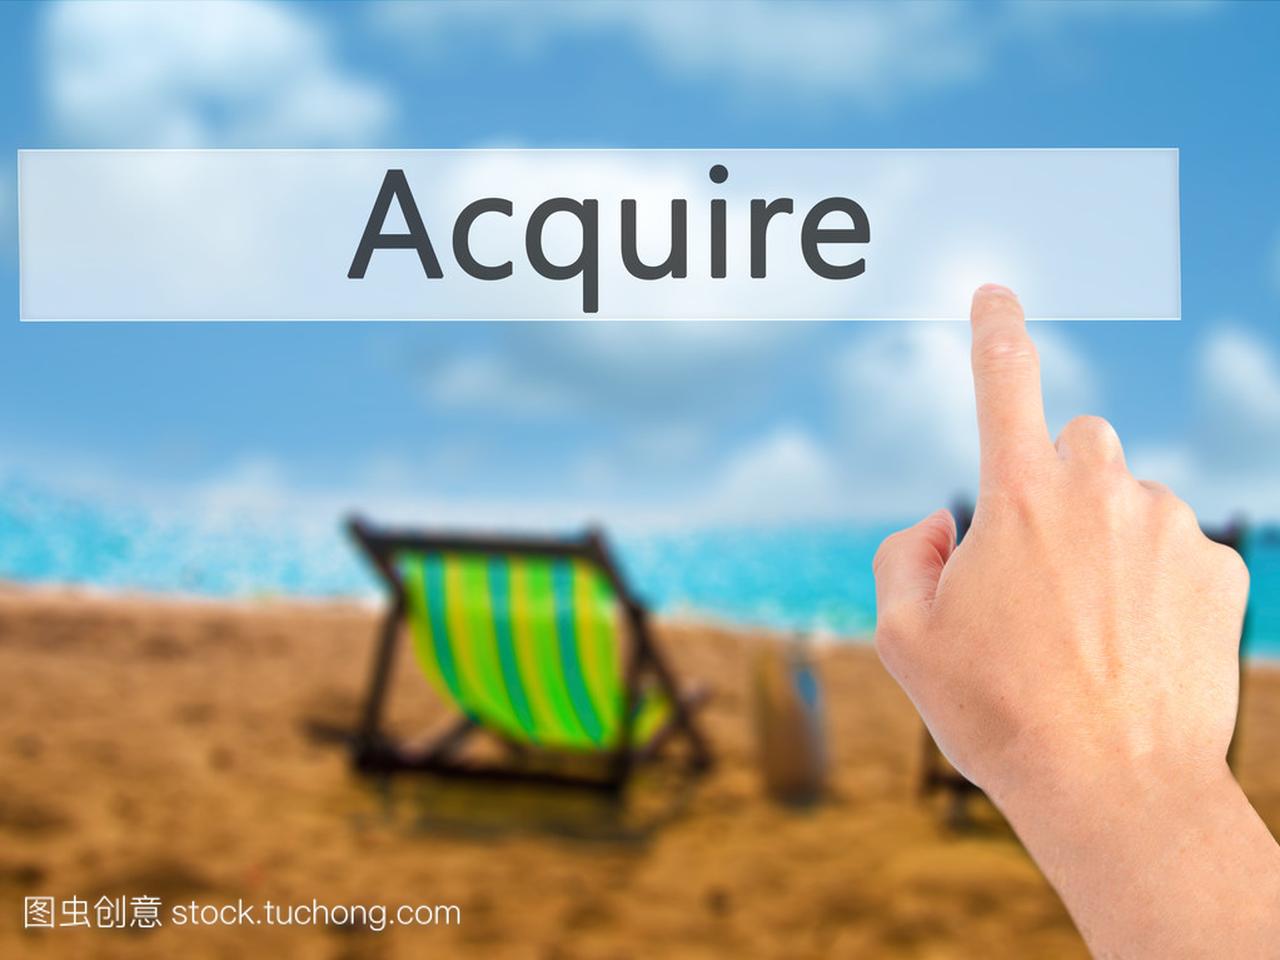 Acquire - Hand pressing a button on blurred 